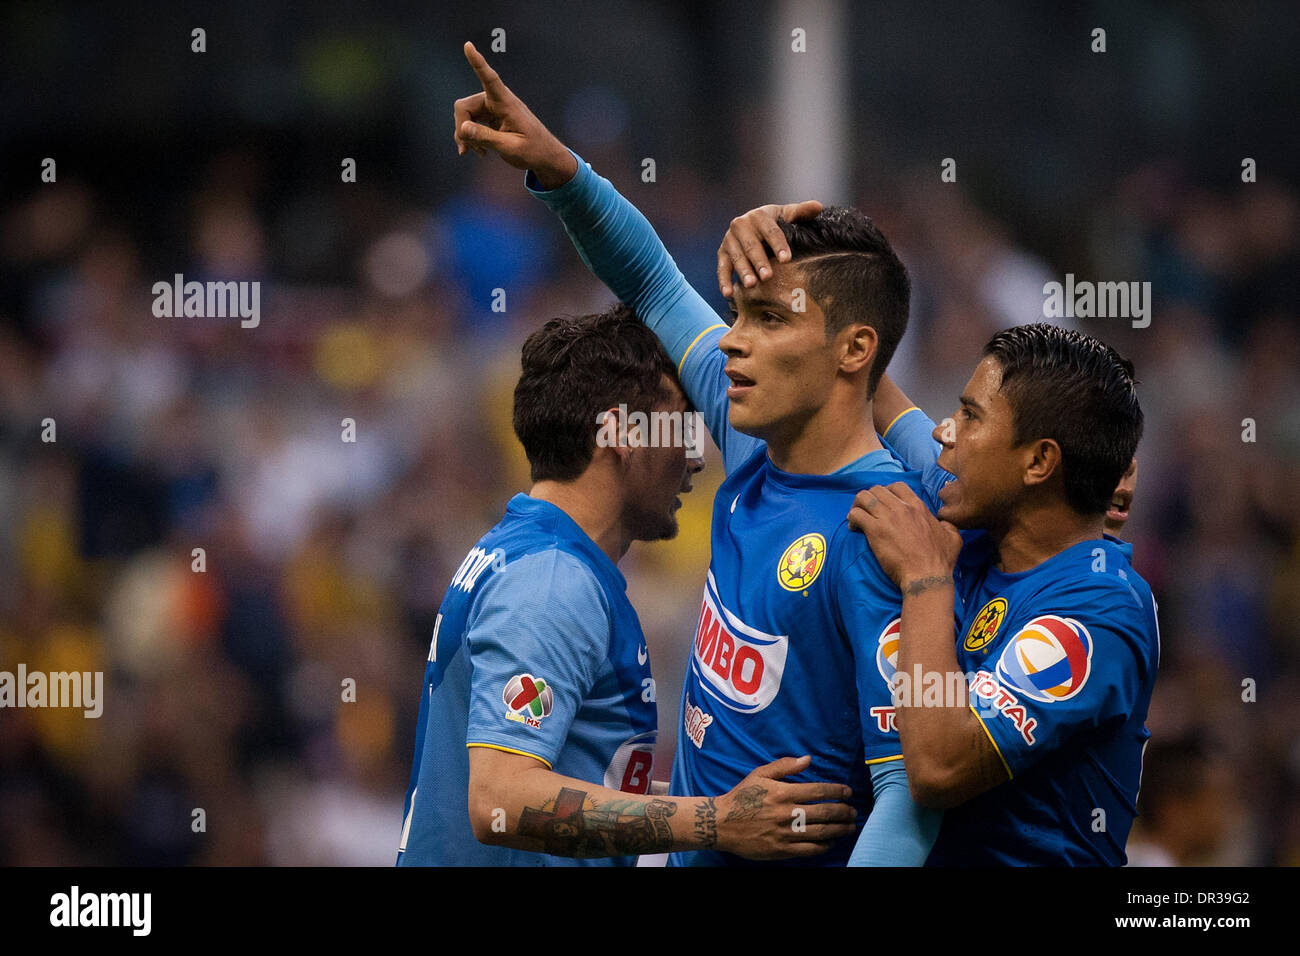 Mexico City, Mexico. 19th Jan, 2014. America's Raul Jimenez (C) celebrates after scoring during the match of the MX League Closing Tournament 2014, against Leon, in Mexico City, capital of Mexico, on Jan. 18, 2014. Credit:  Pedro Mera/Xinhua/Alamy Live News Stock Photo